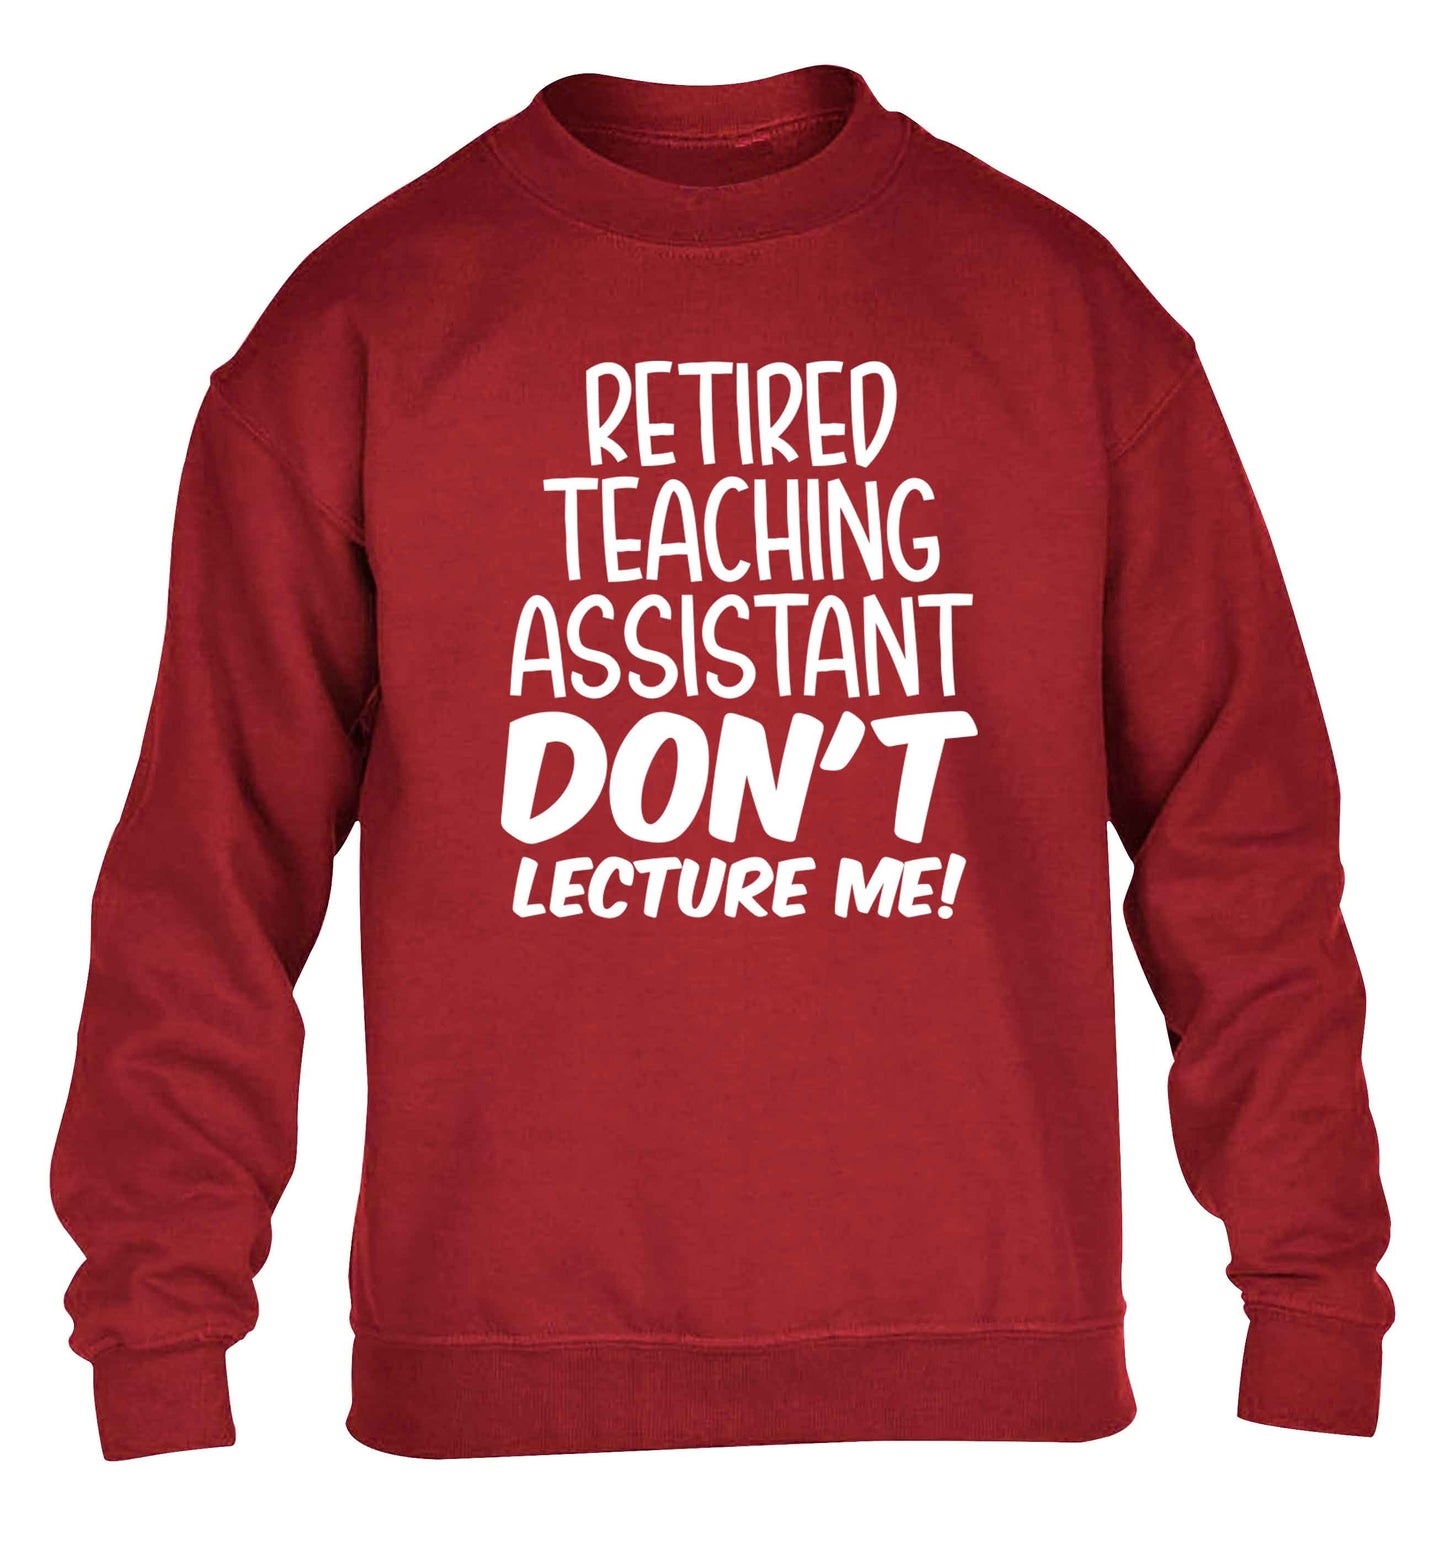 Retired teaching assistant don't lecture me children's grey sweater 12-13 Years